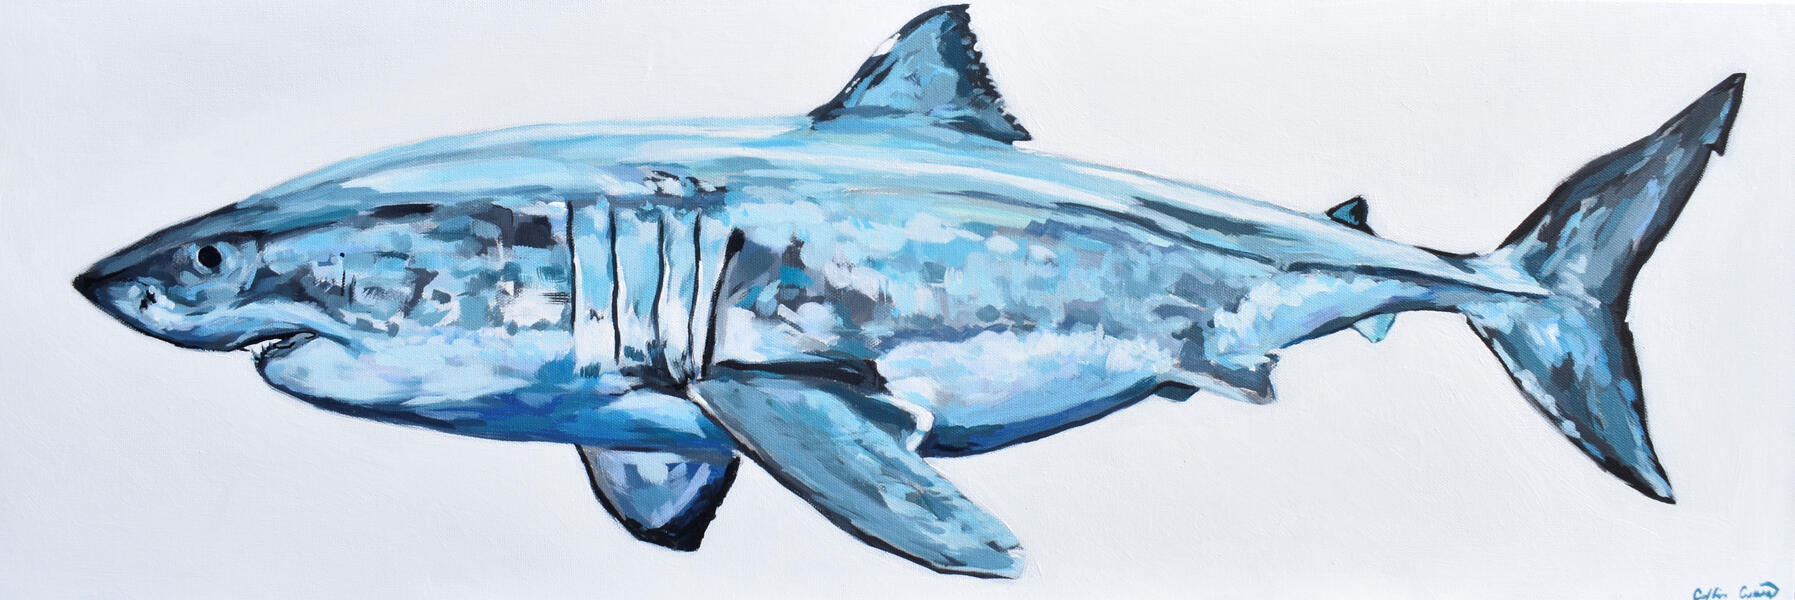 Great White Shark painting by Collin Cessna 